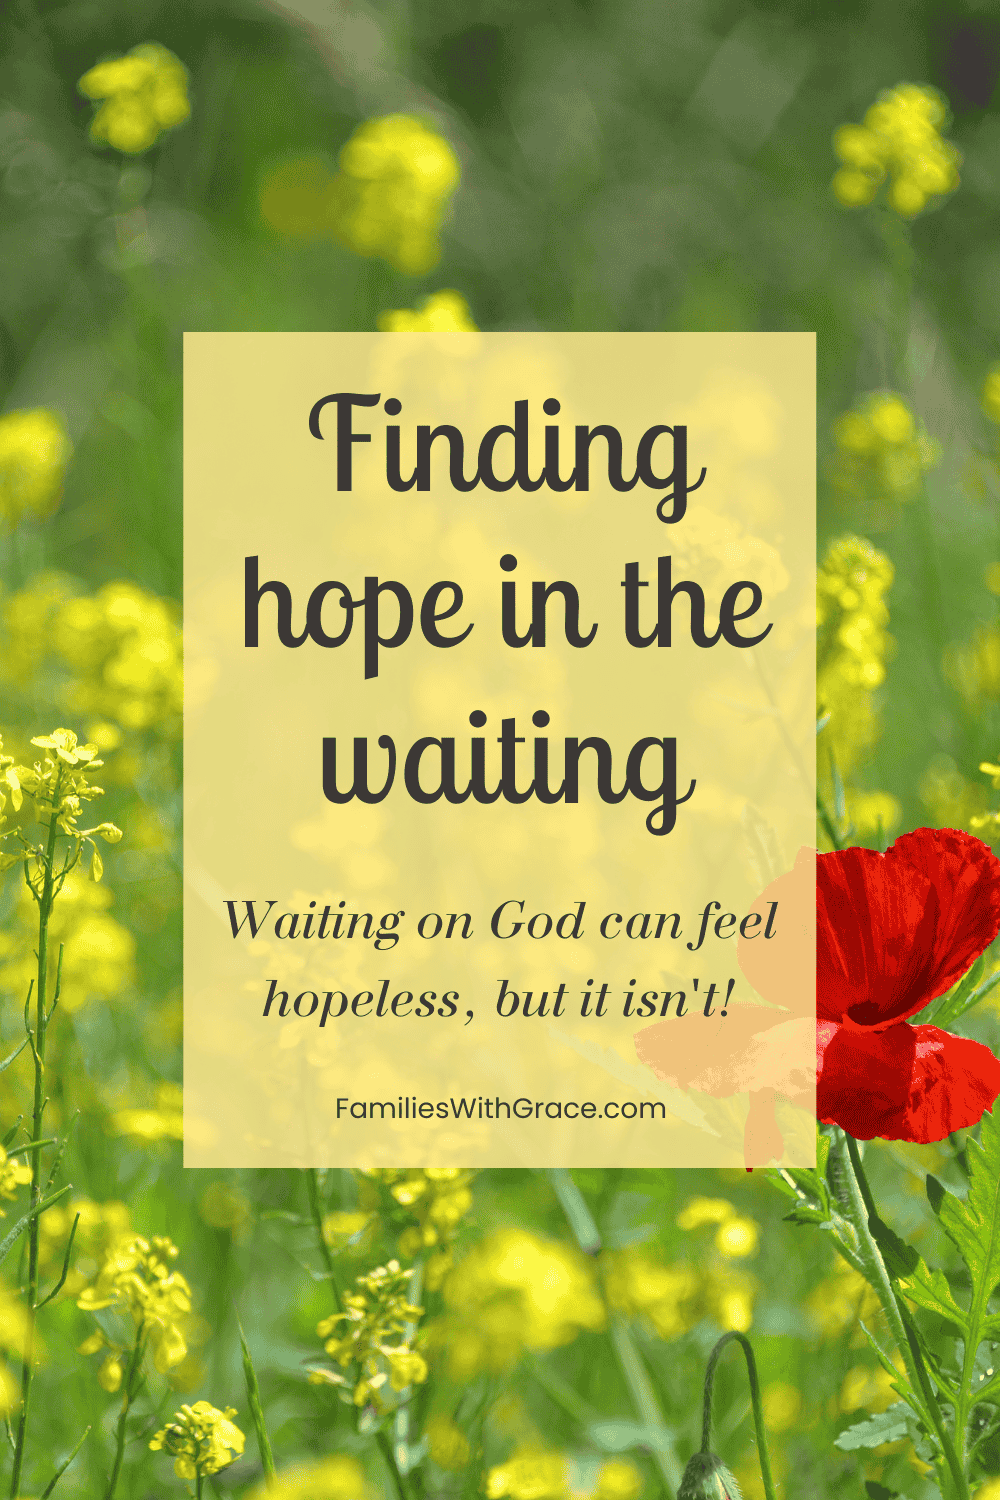 Finding hope in the waiting